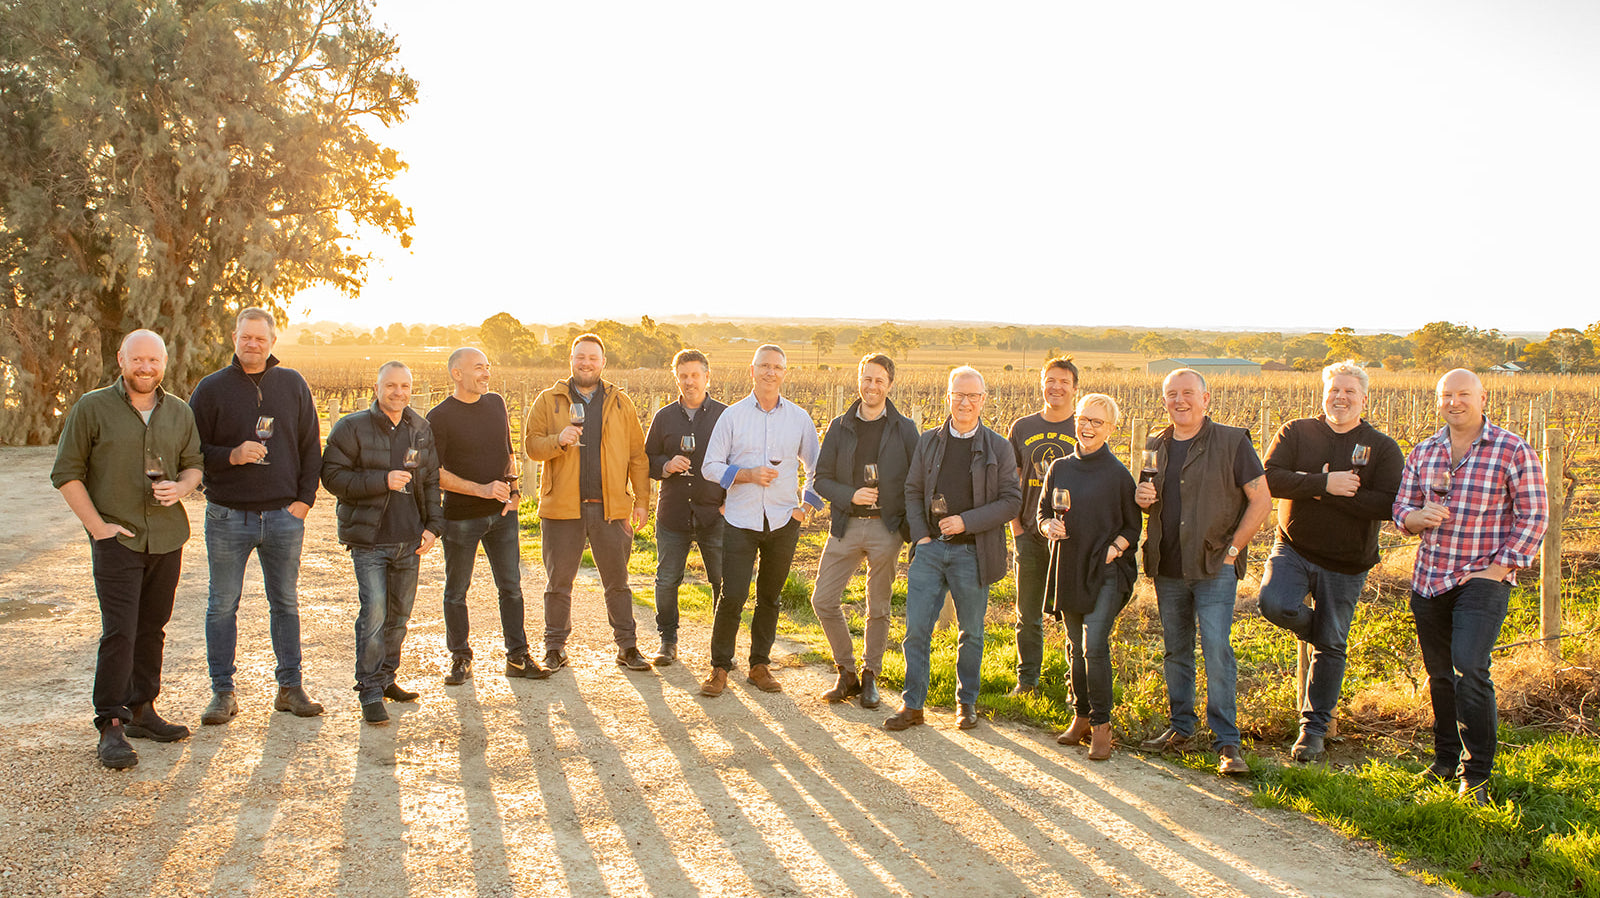 Group image of the Artisans of Barossa